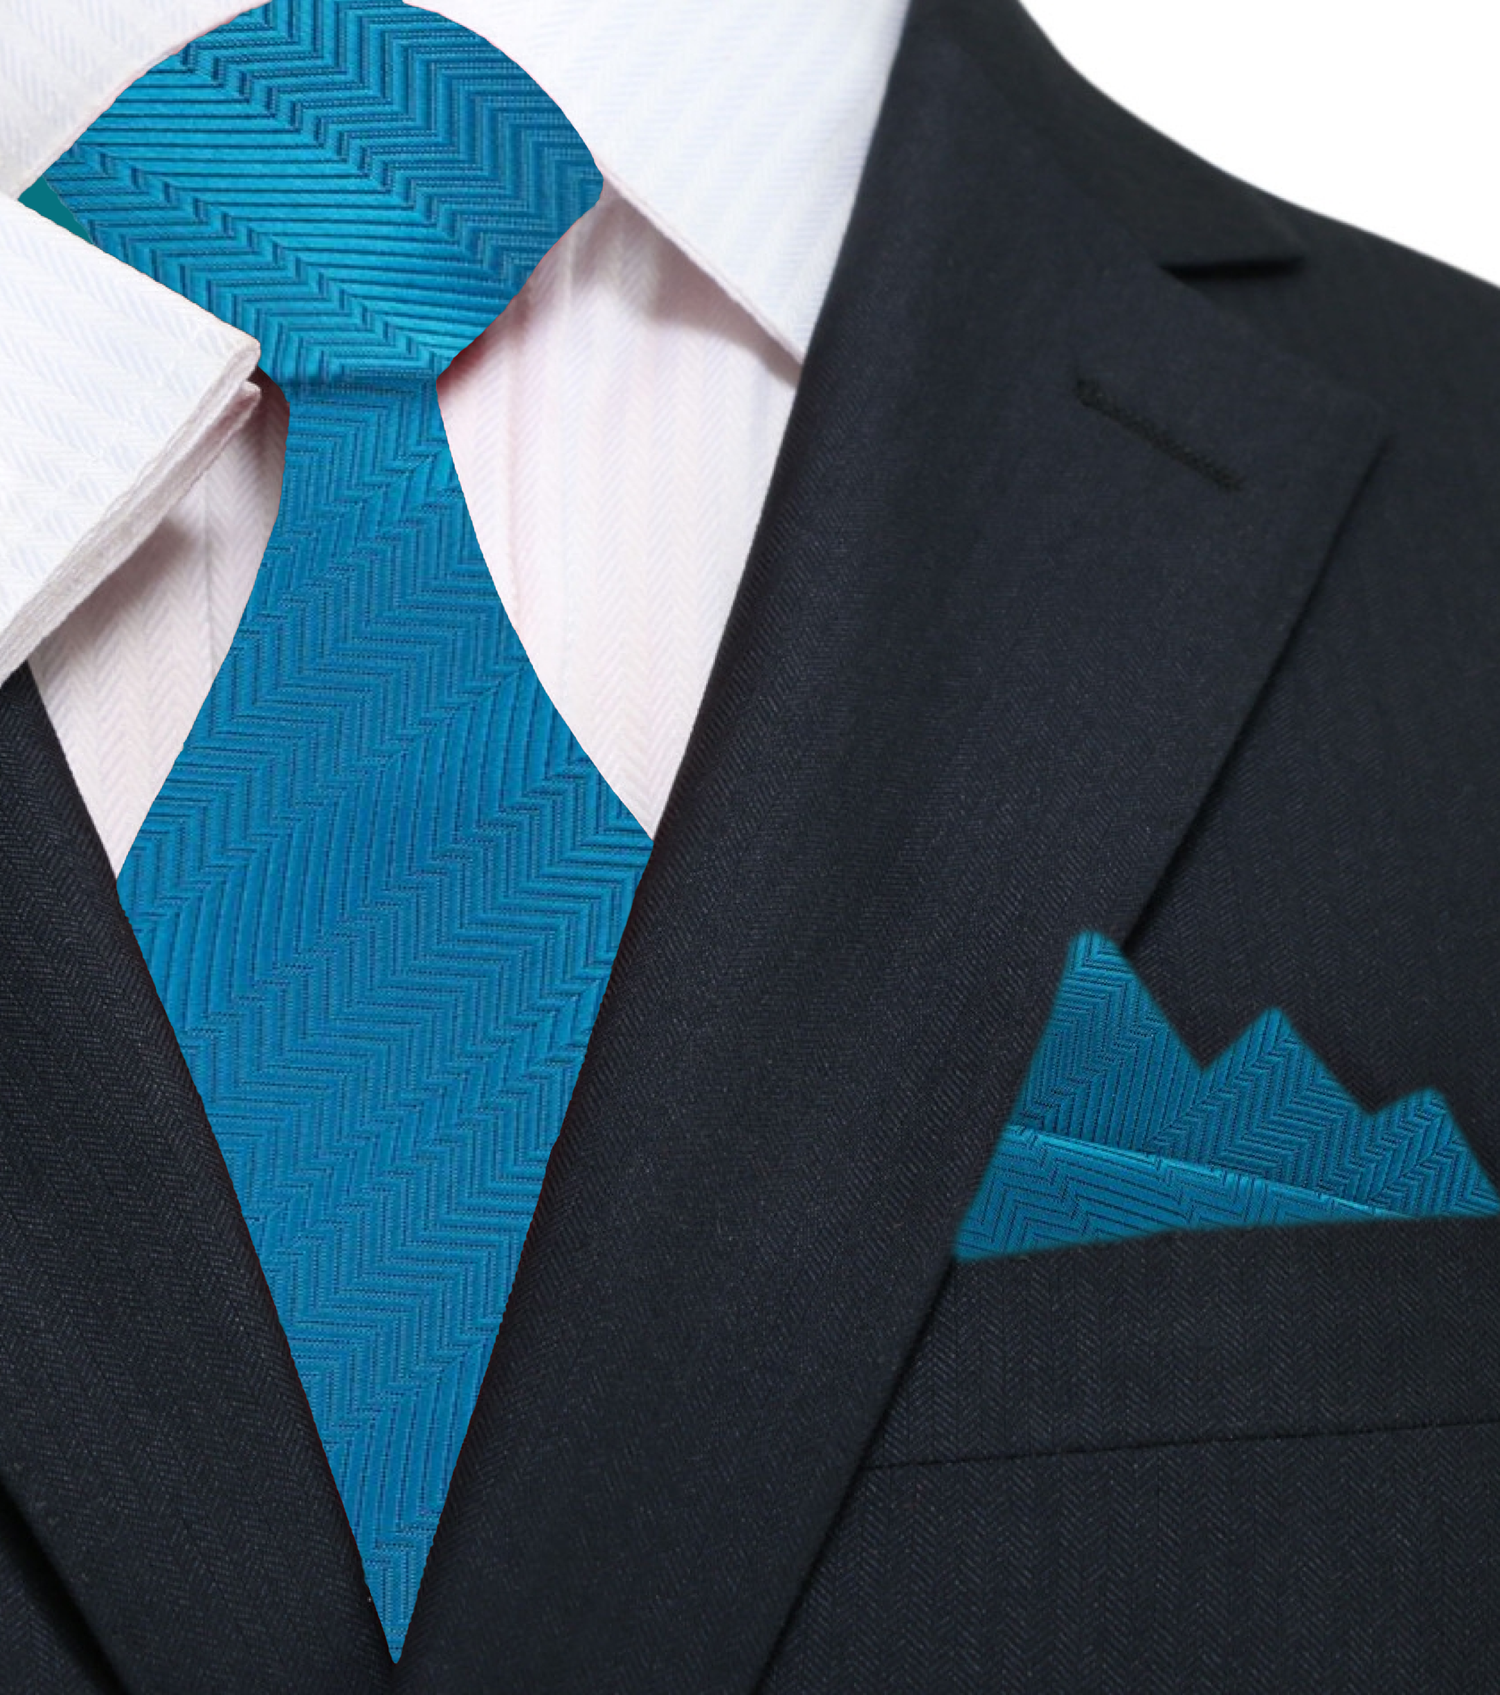 Main: Rich Teal Tie and Pocket Square||Rich Teal